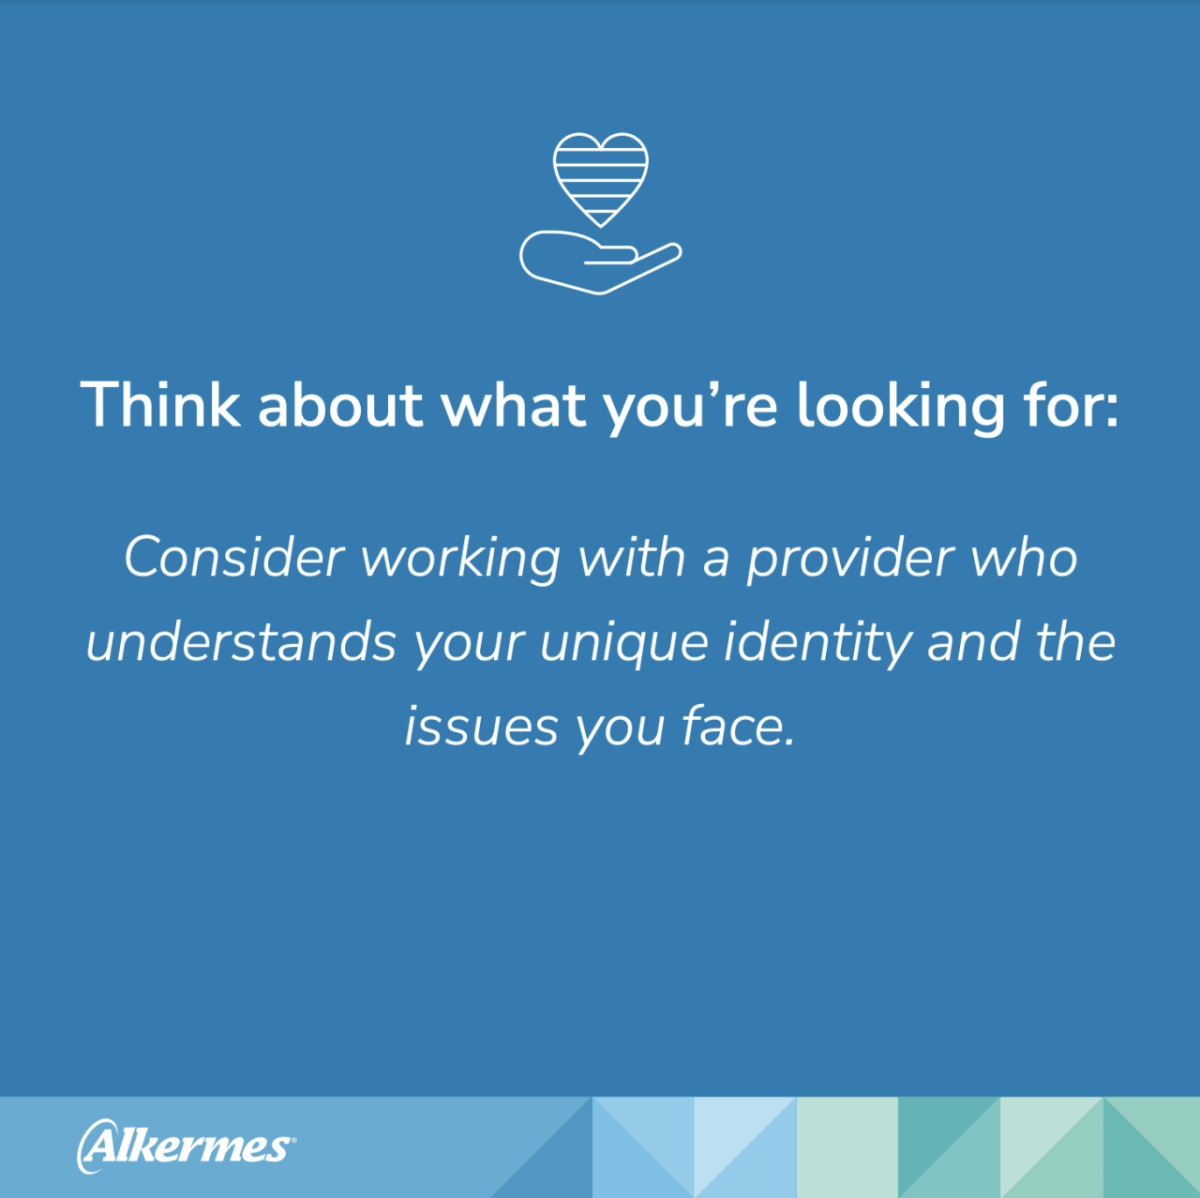 PDF Slide with the text "Think about what you're looing for: Consider working with a provider who understands your unique identity and the issues you face"